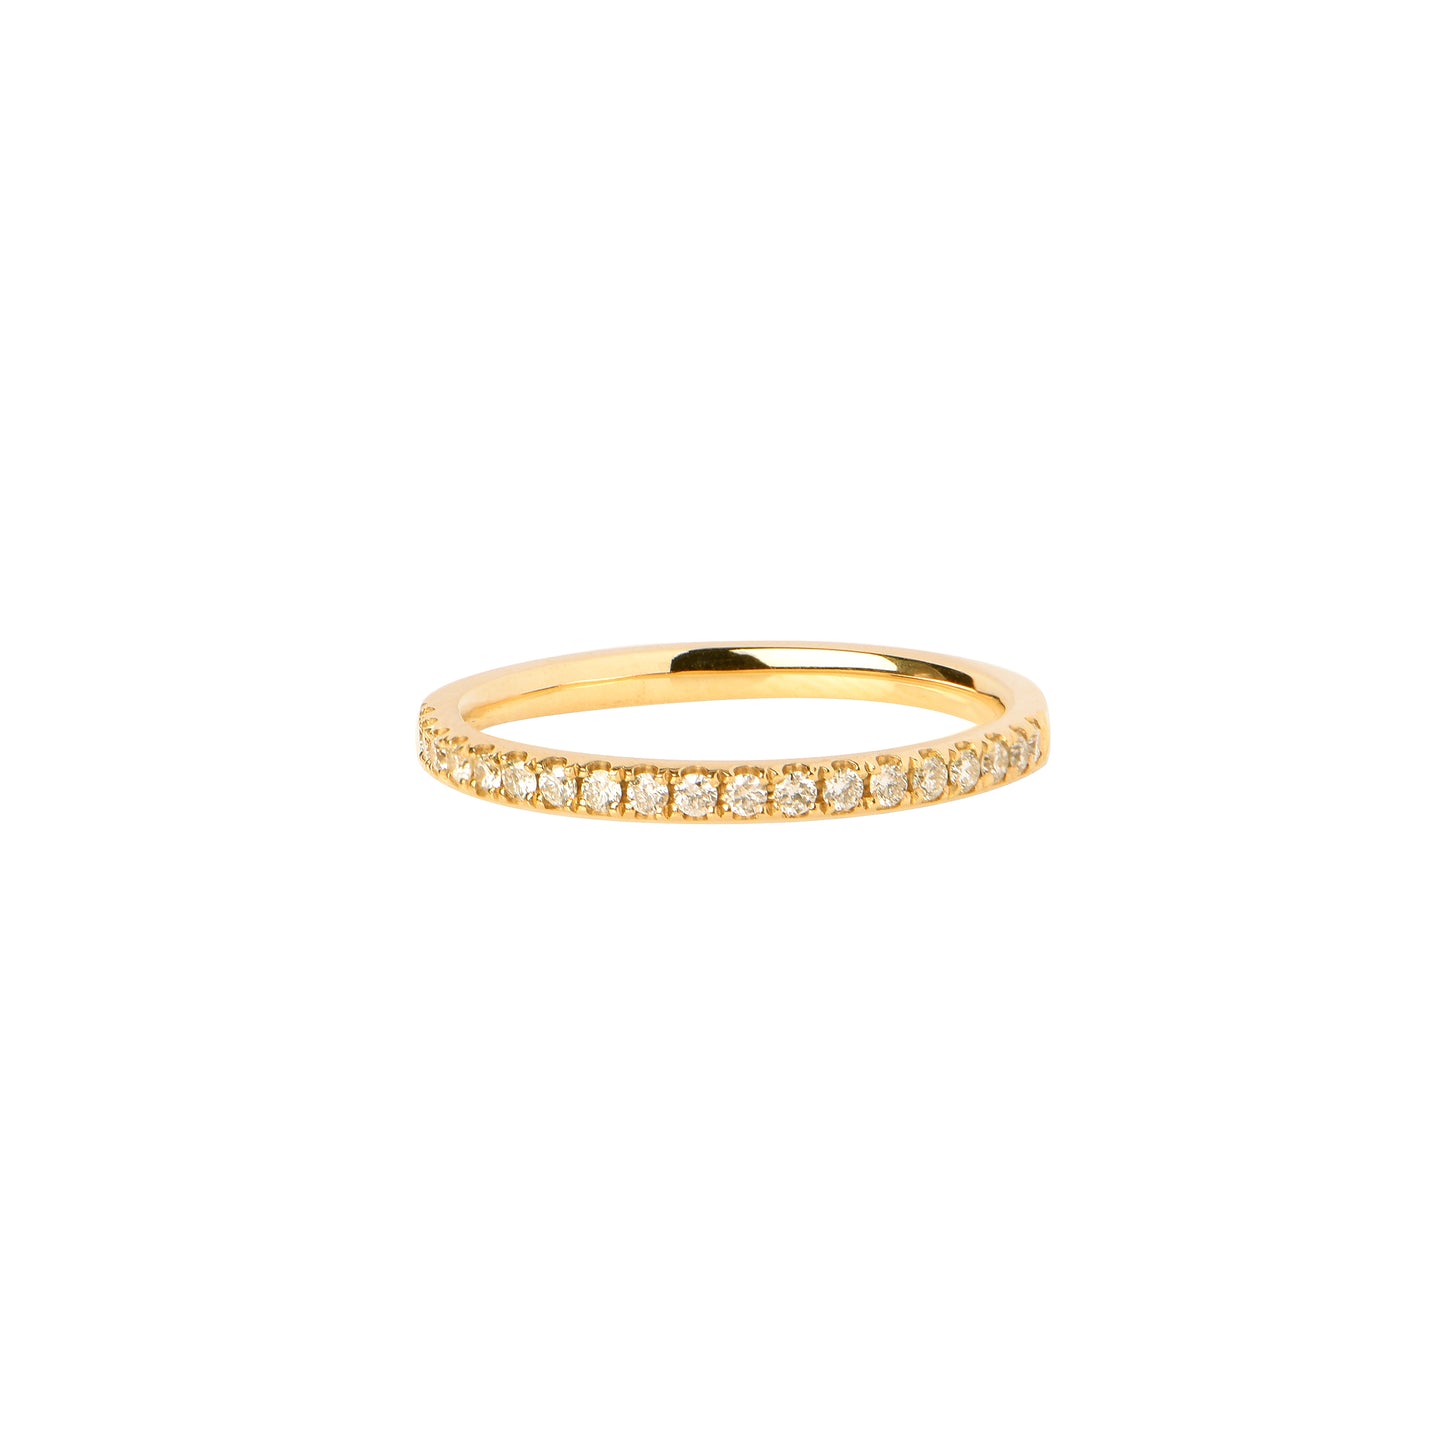 Diamond Ring in 18ct Gold (Item 2201011) 1.8Mm Wide